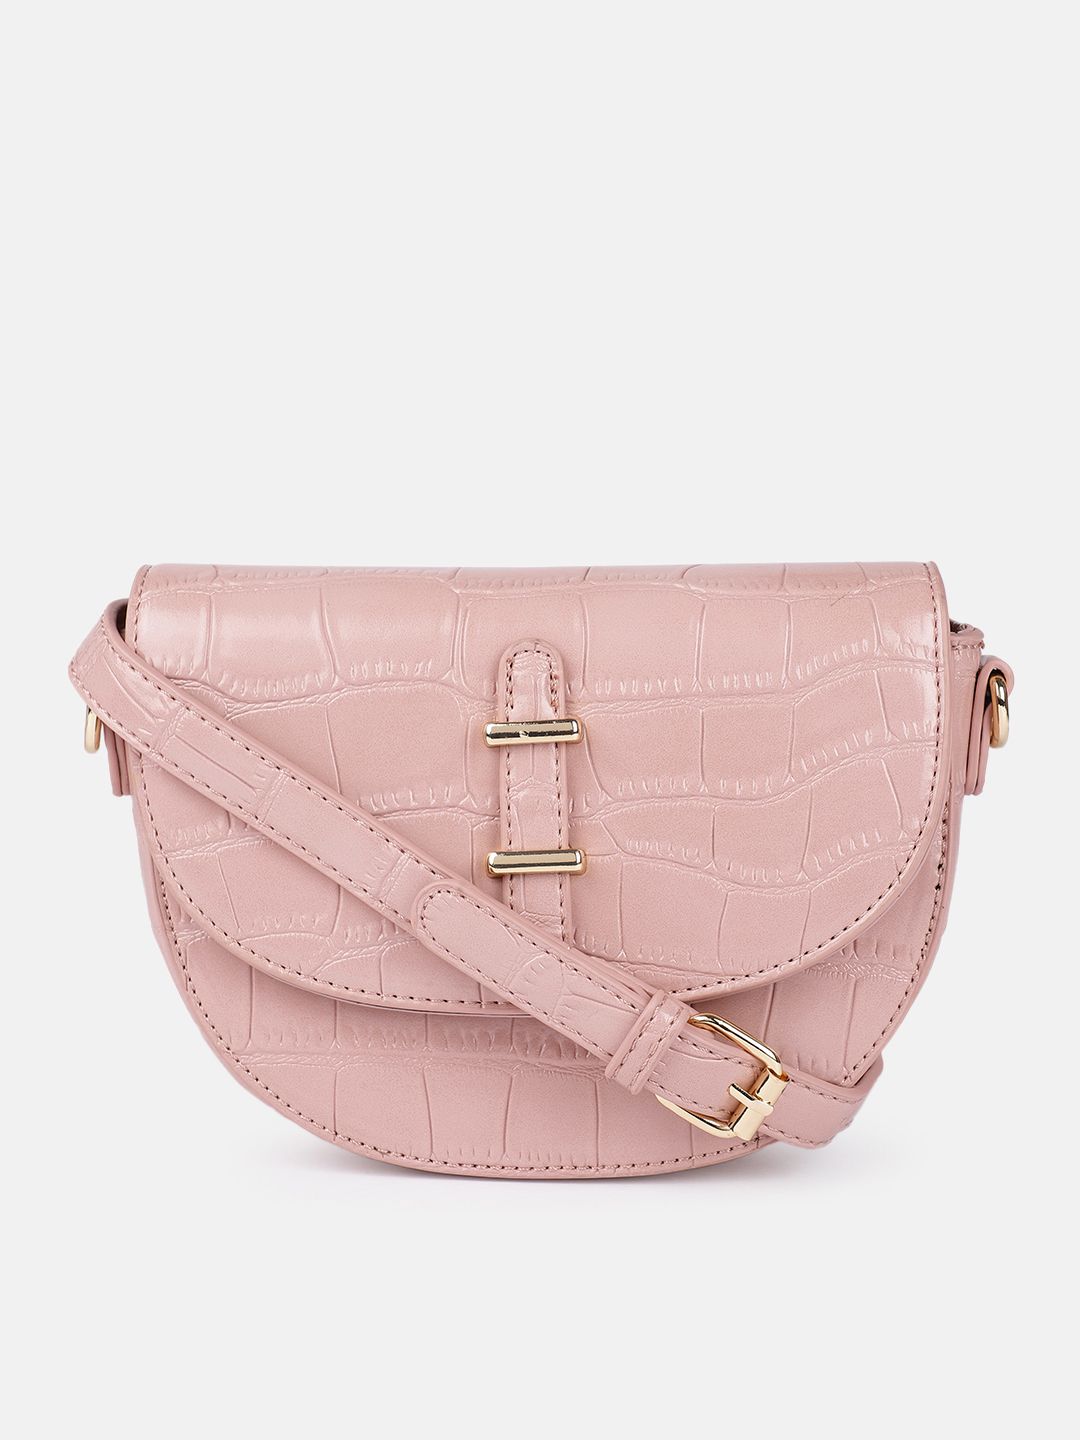 Mast & Harbour Pink Croc Textured Sling Bag Price in India